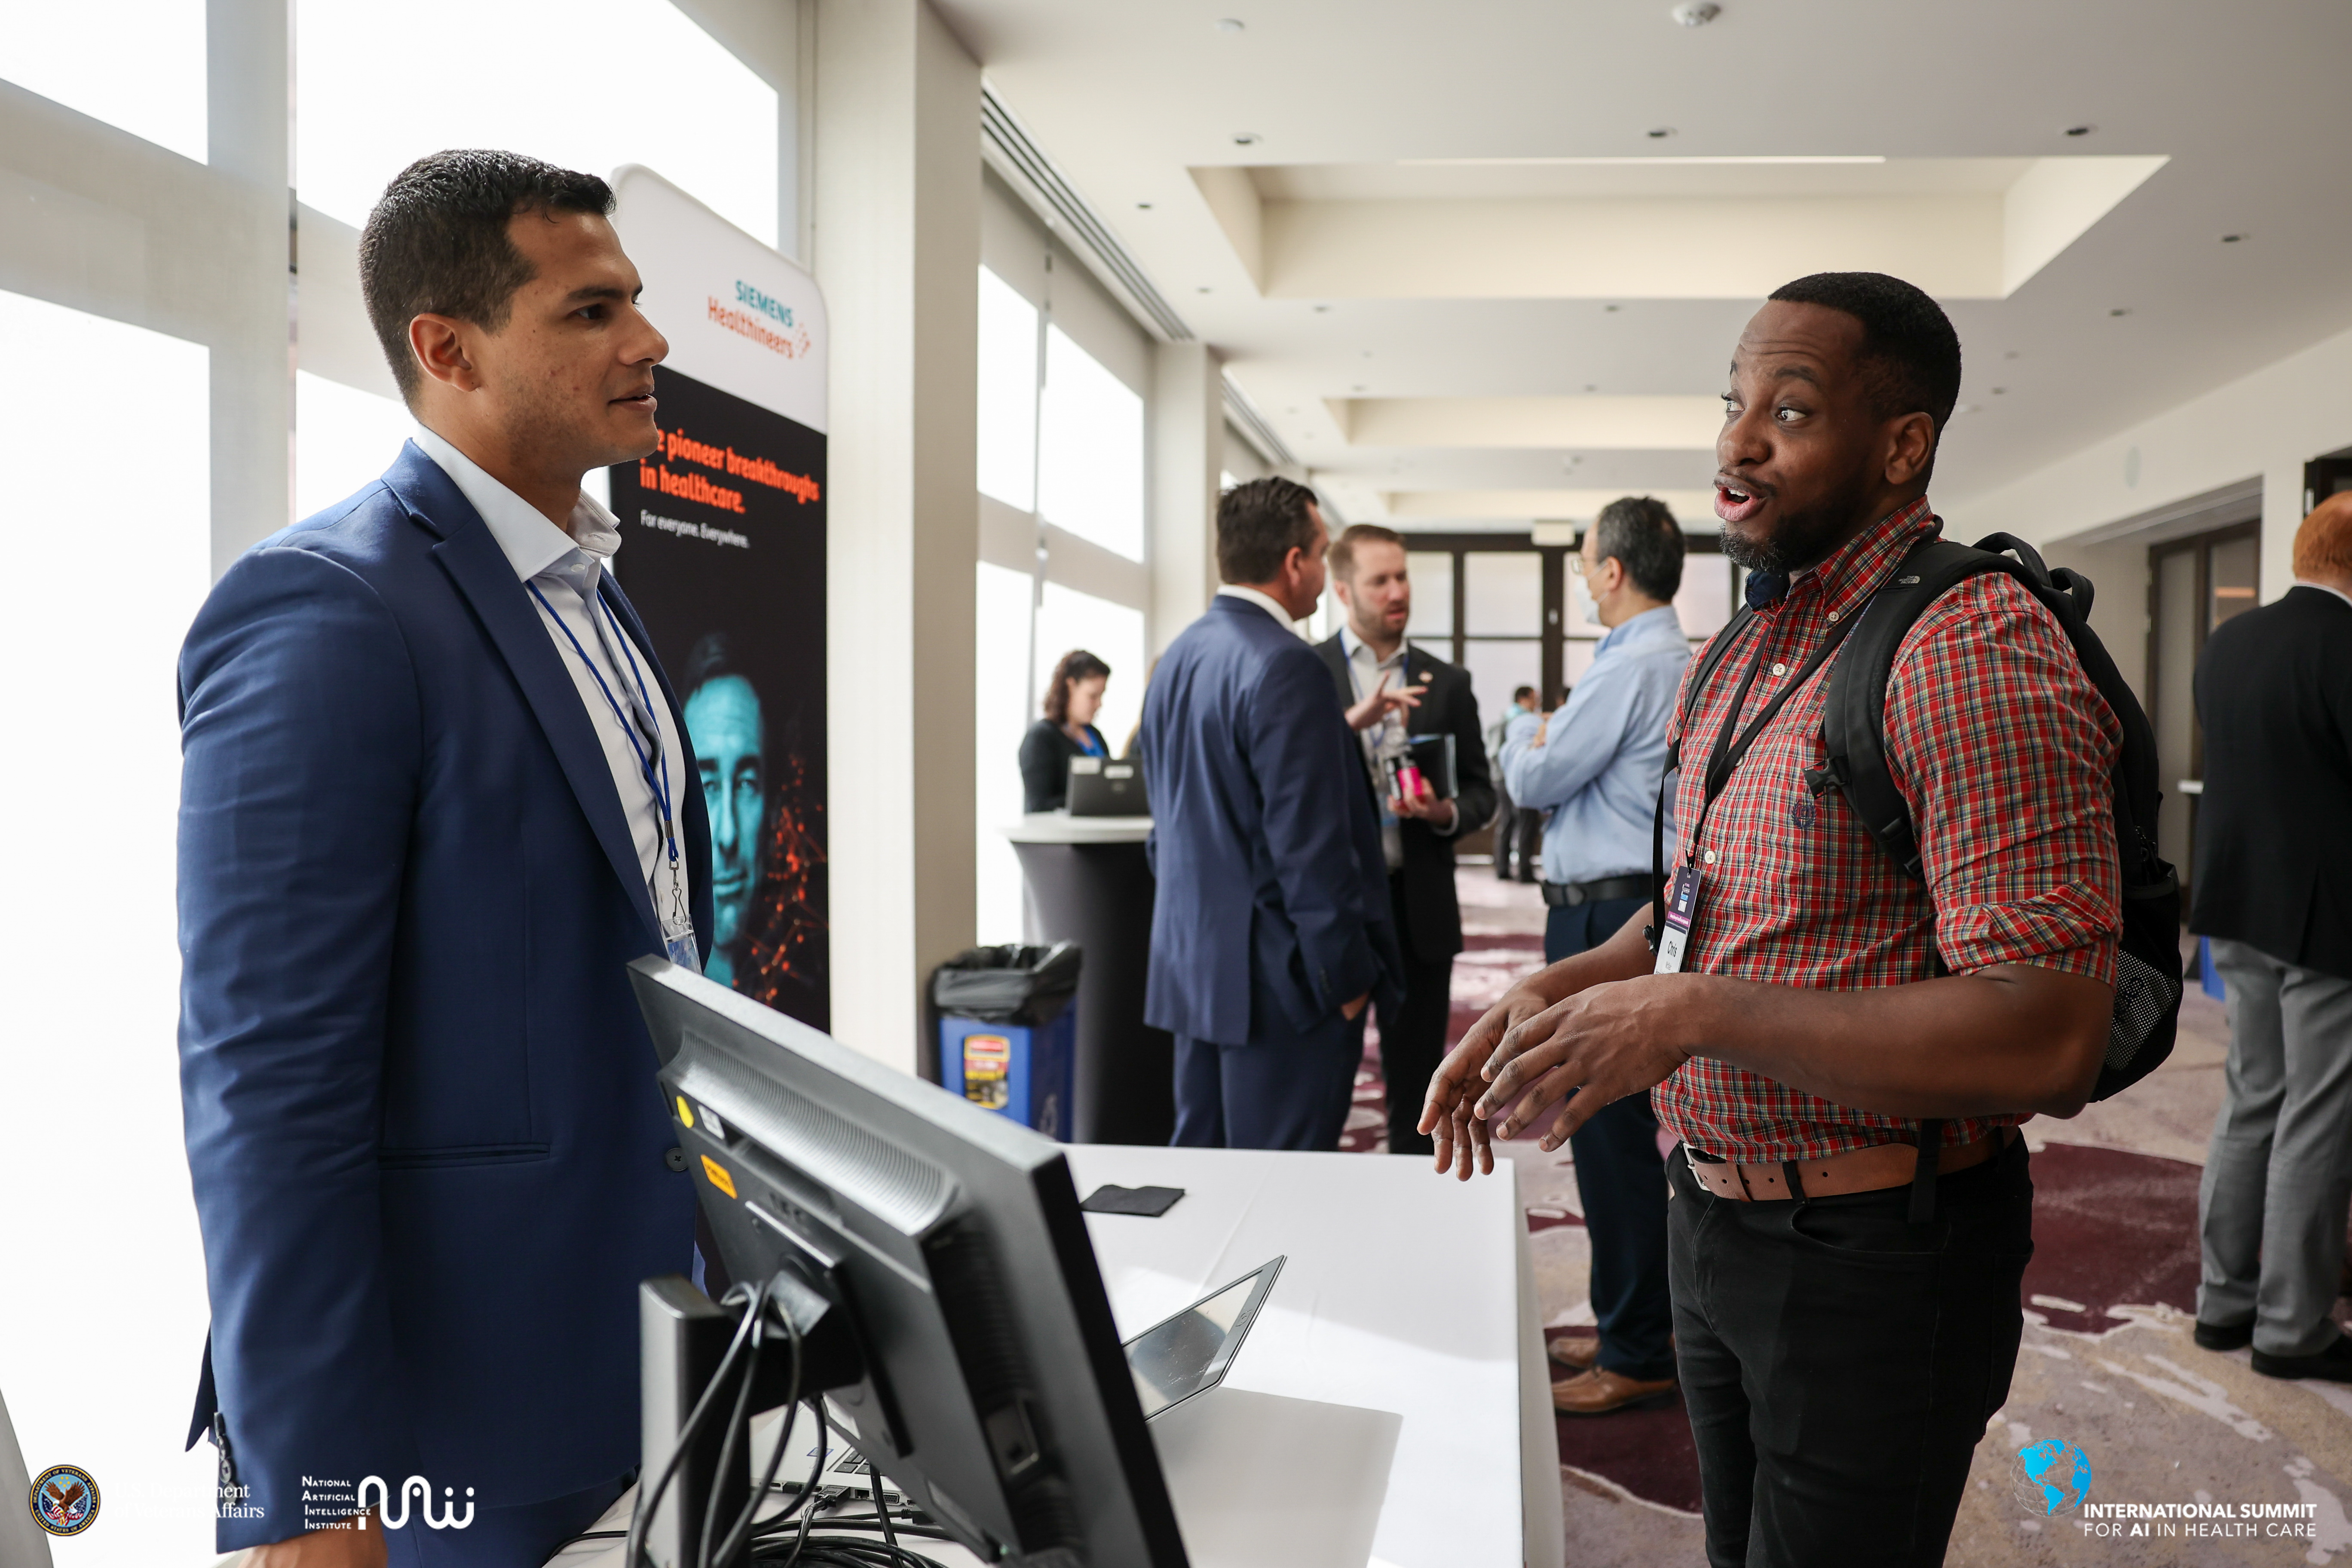 AI Summit attendees networking with exhibitors during coffee hour